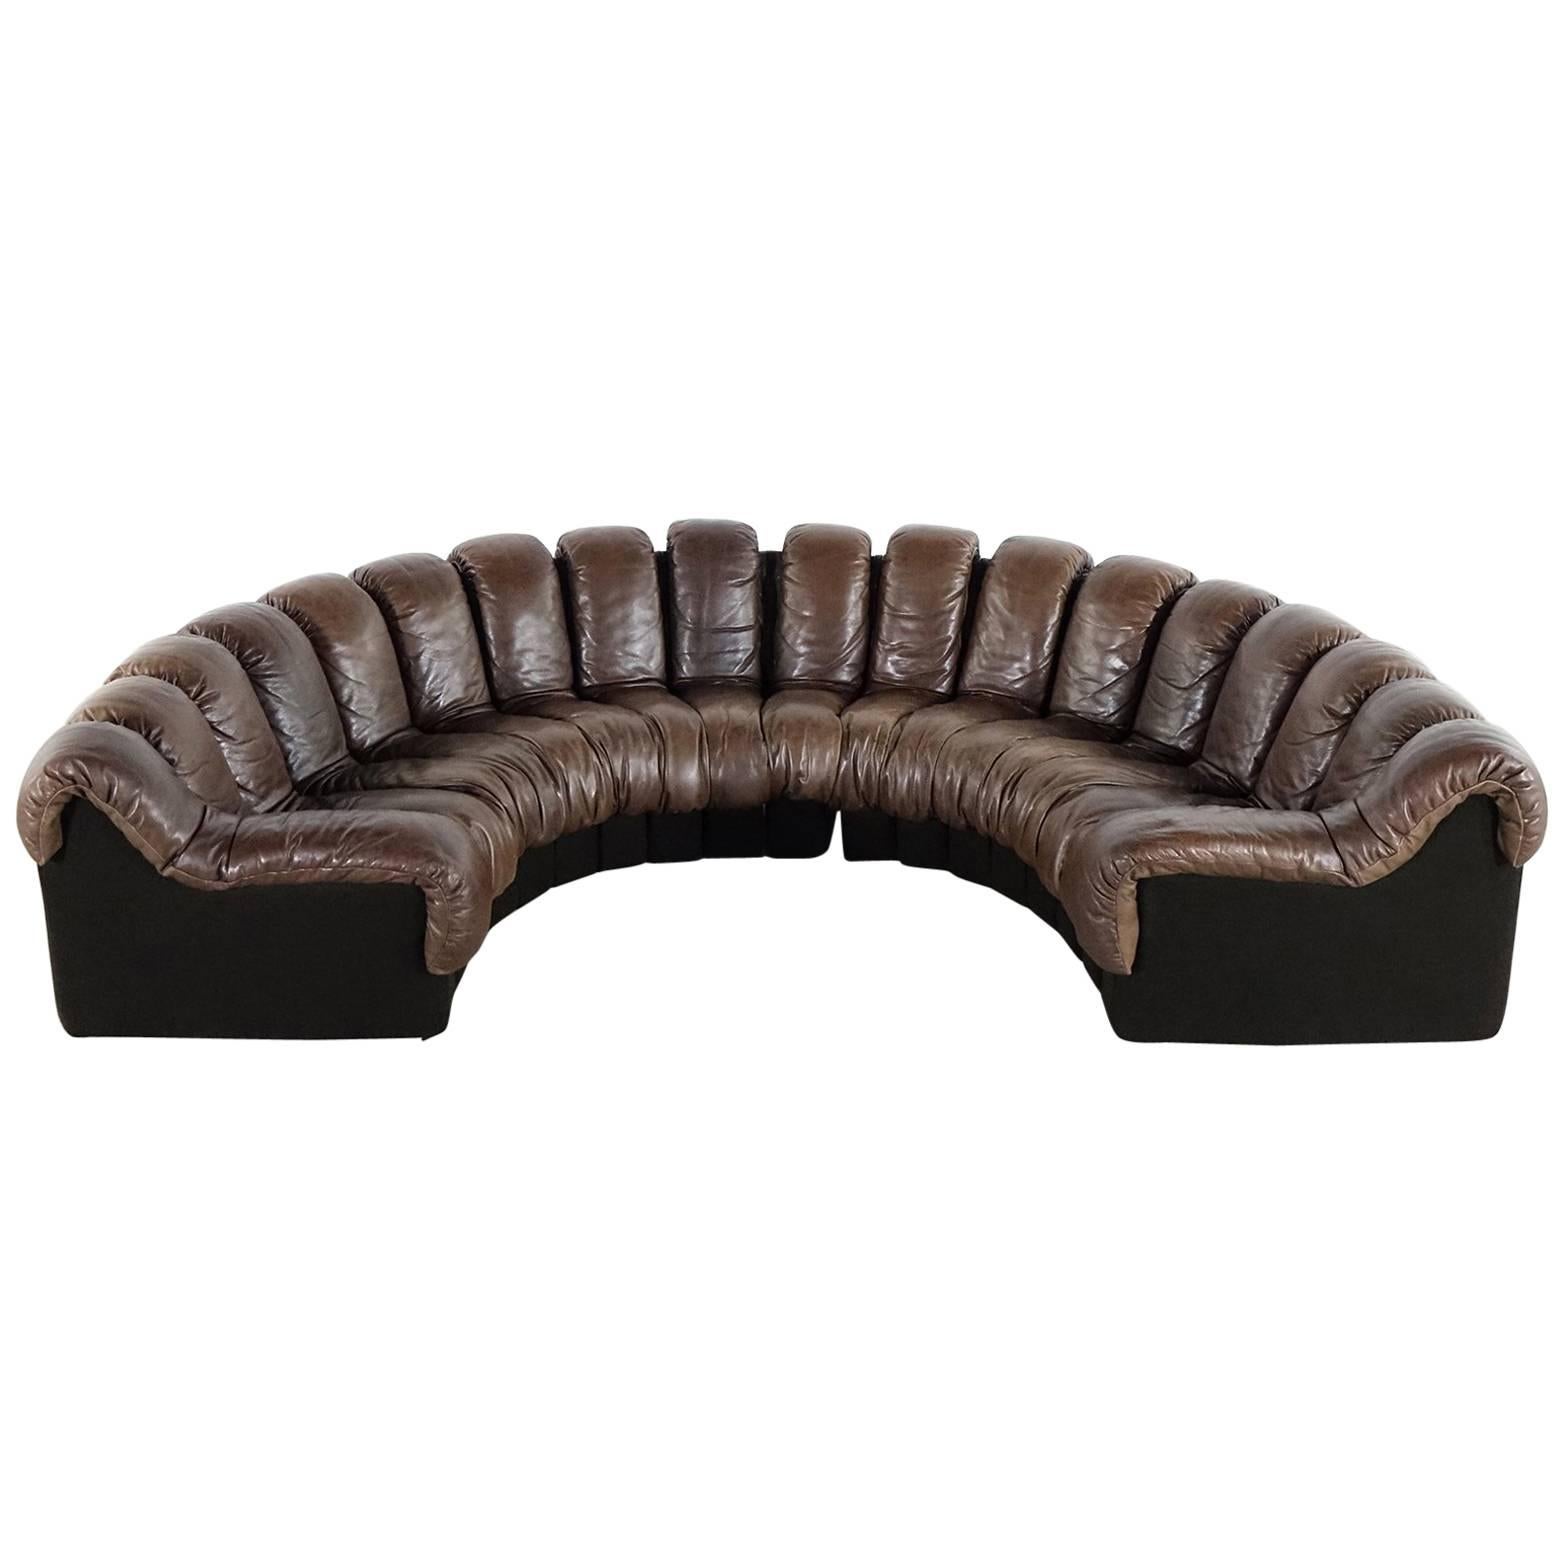 De Sede Ds 600 Sofa by Ueli Berger and Riva 1972, Chocolate Leather 18 Elements